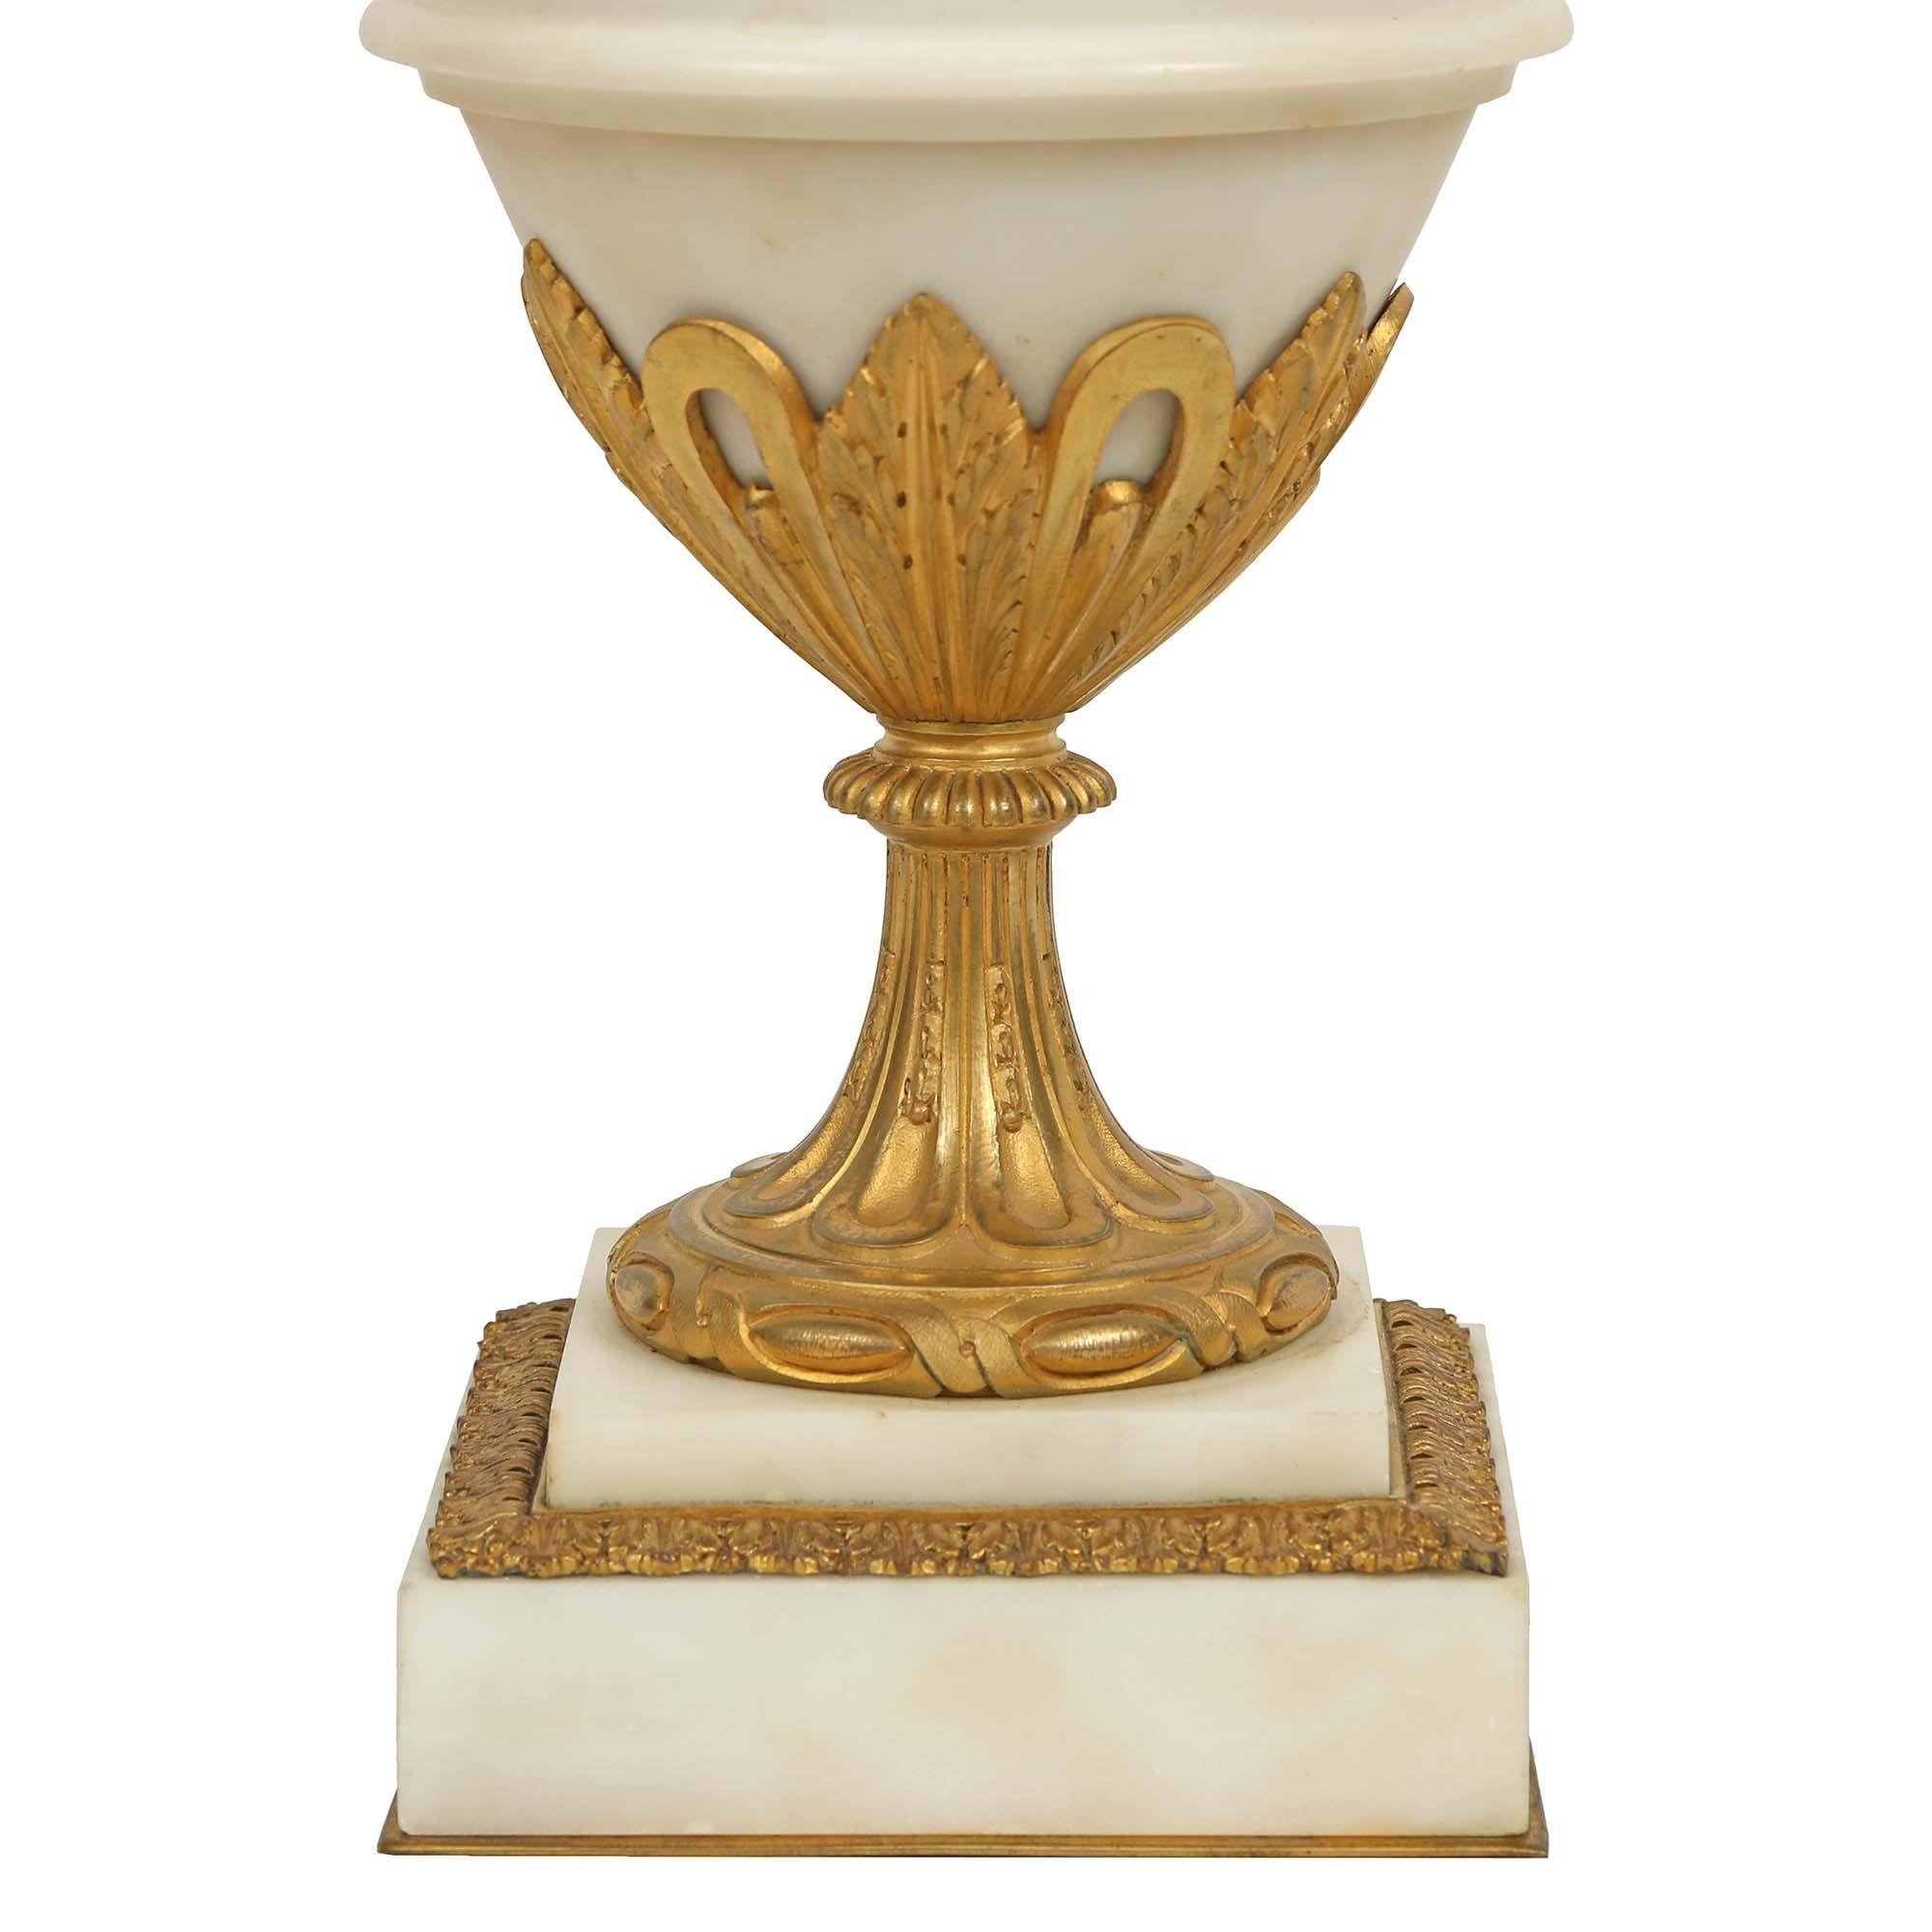 French 19th Century Louis XVI Style White Carrara Marble and Ormolu Urns For Sale 4